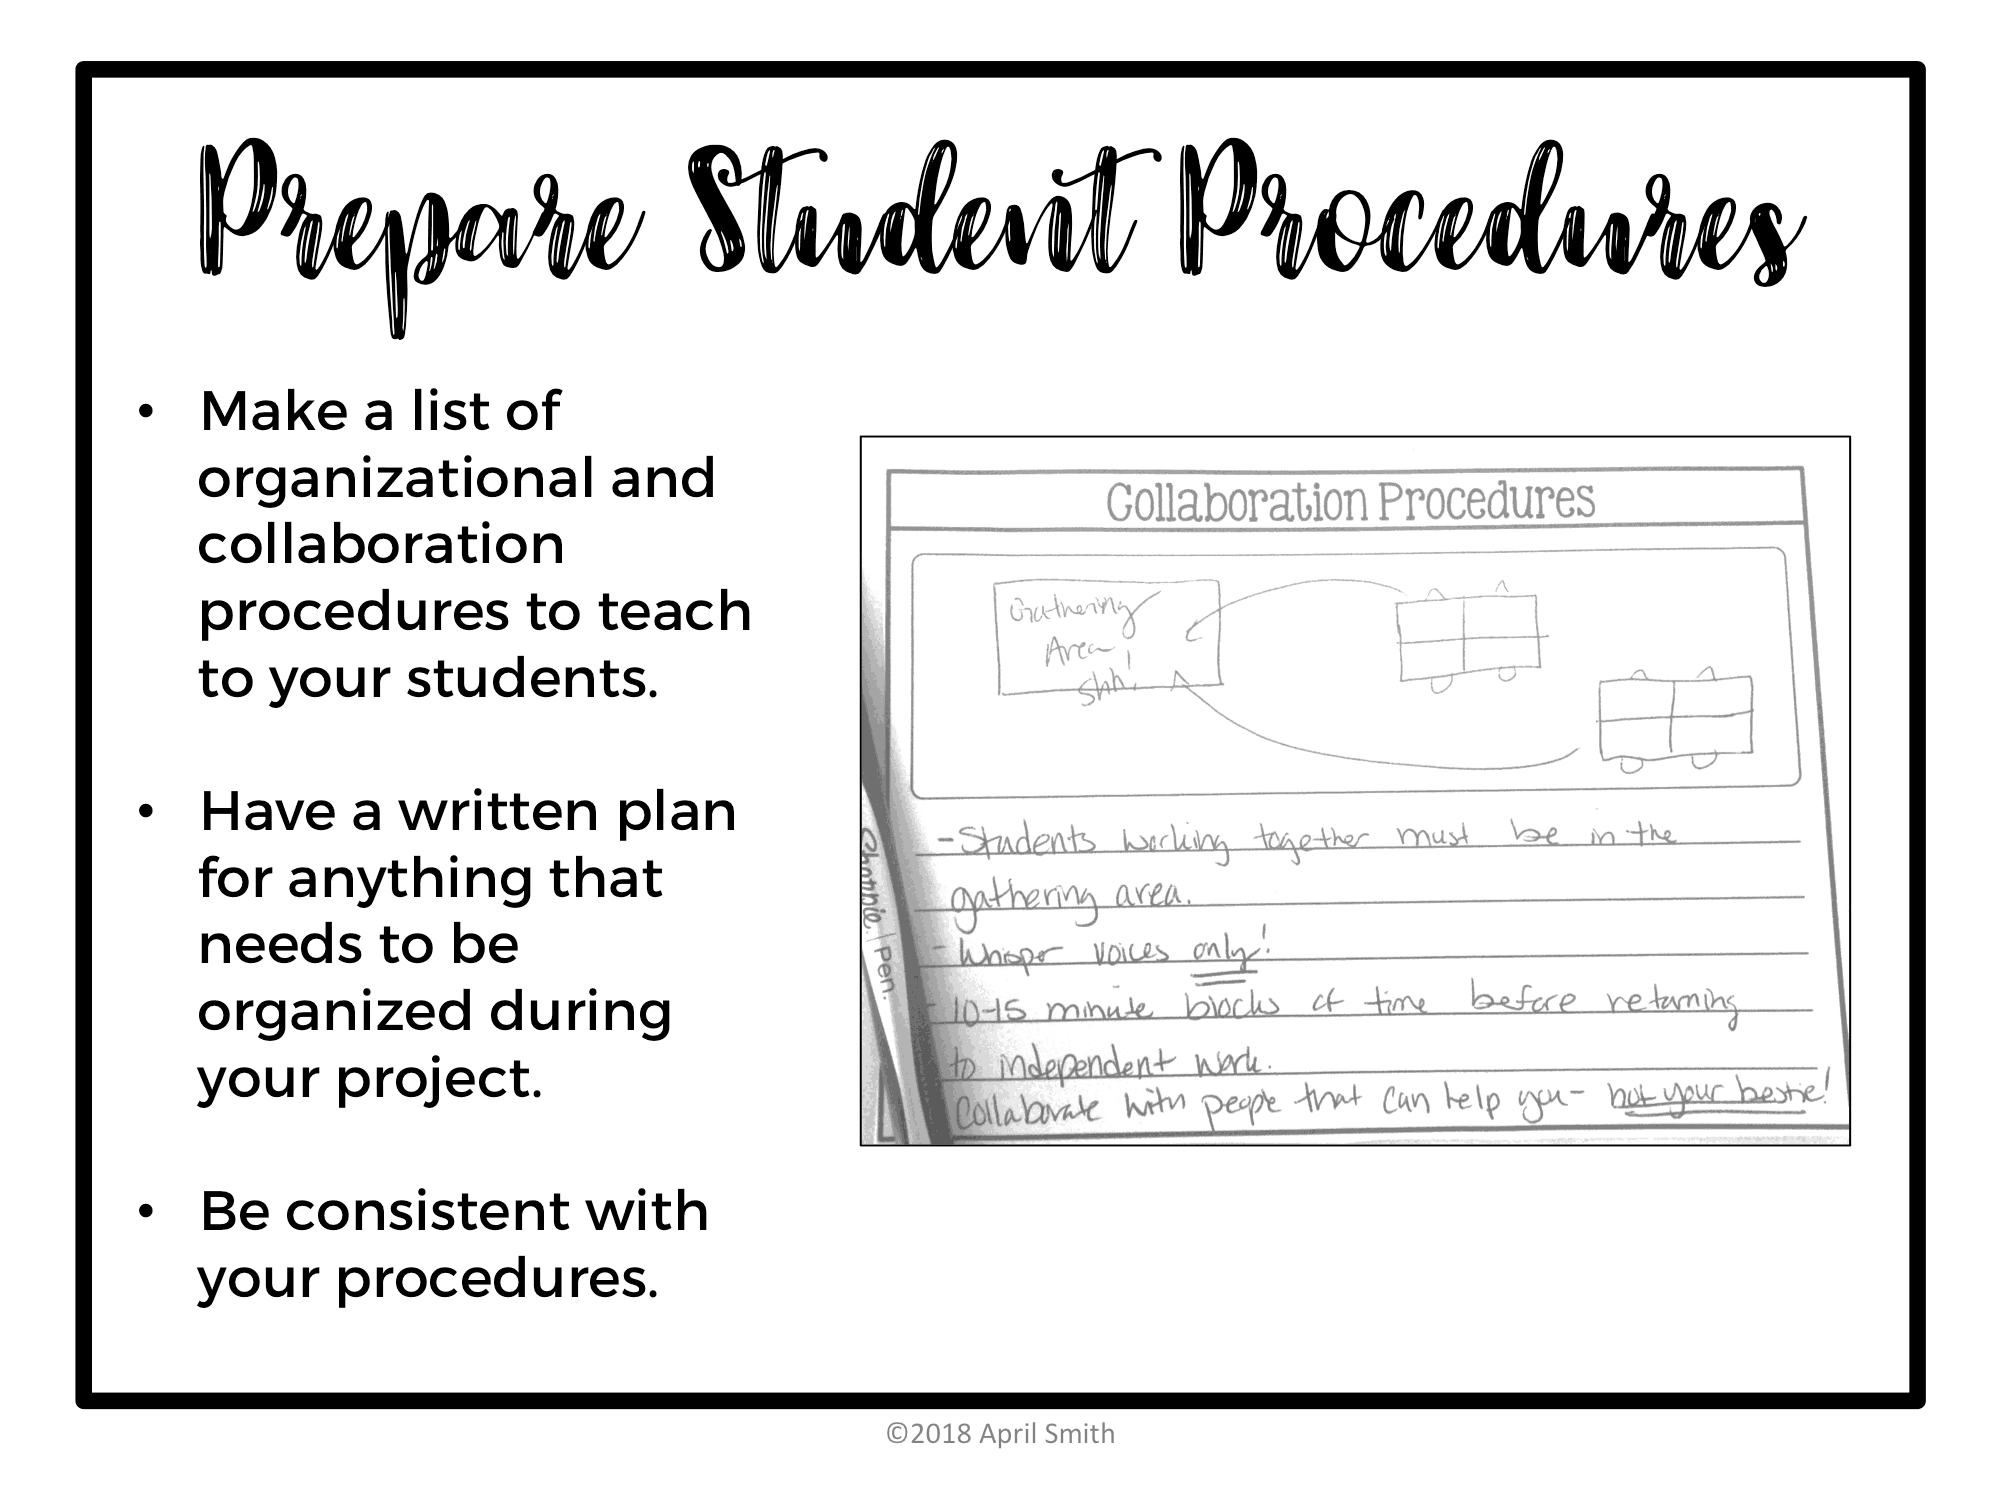 A graphic explaining student procedures to organize project based learning